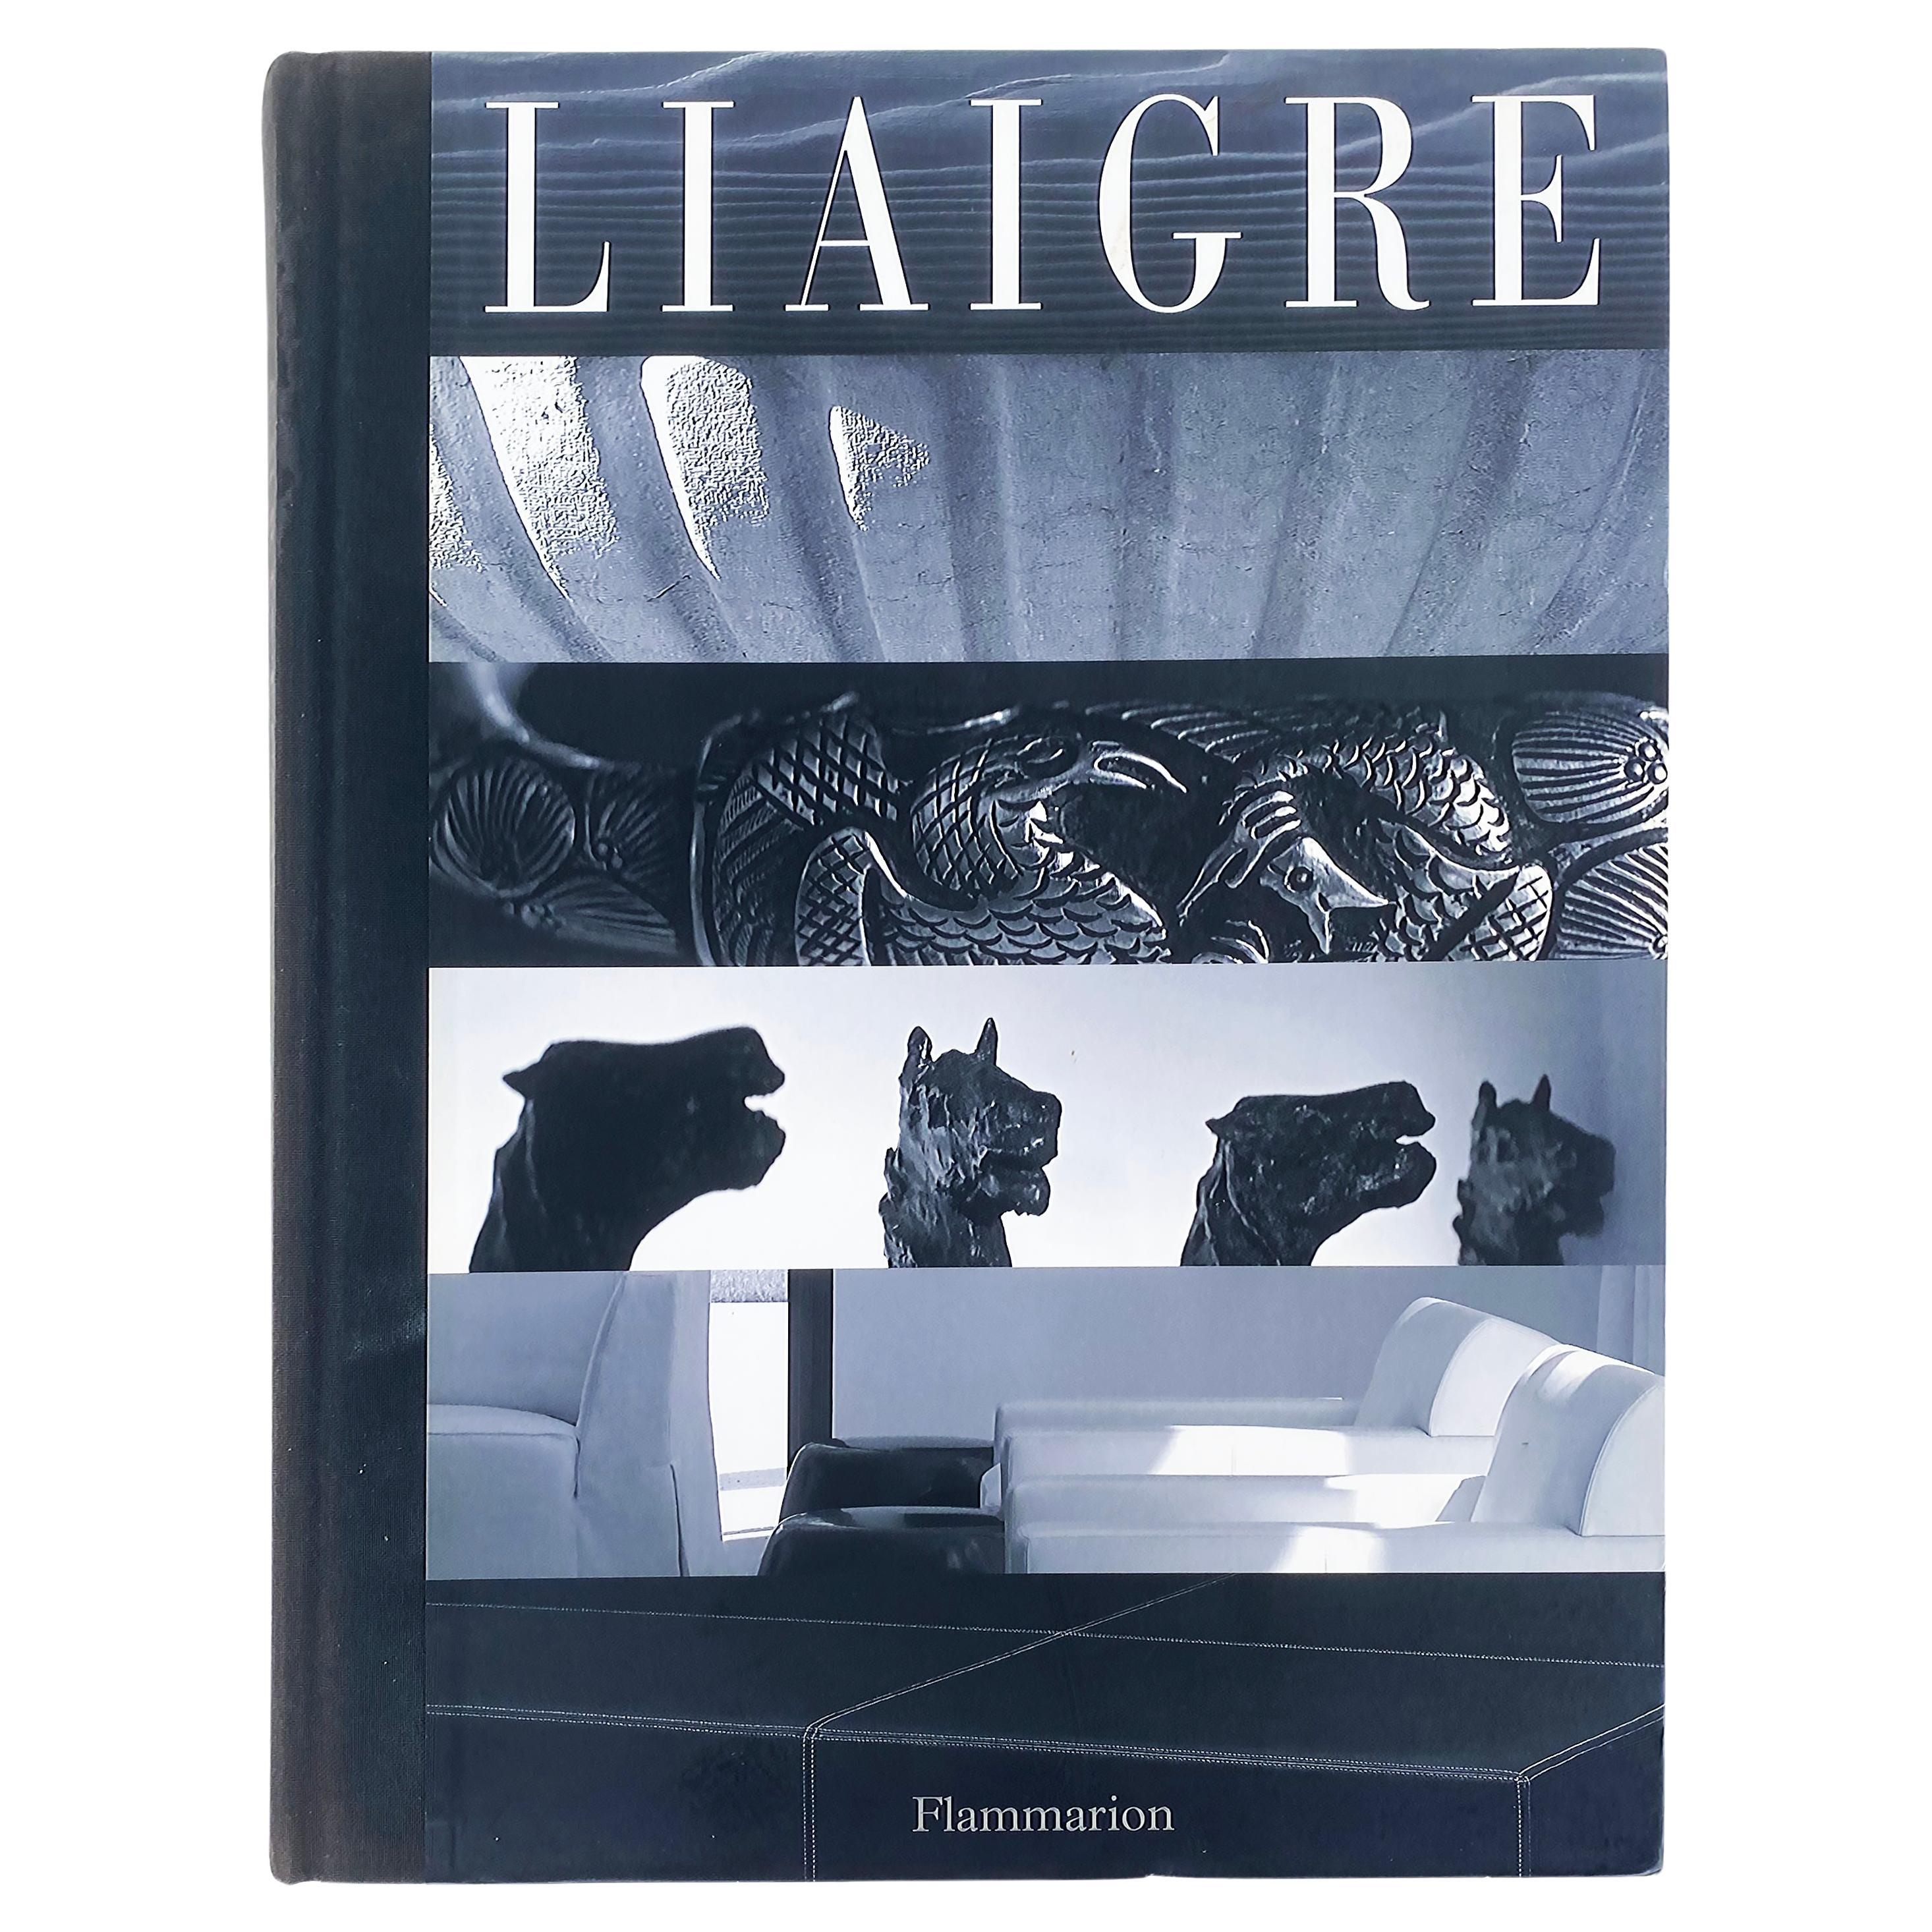 LIAIGRE Book by Flammarion Published in France 2007-2008